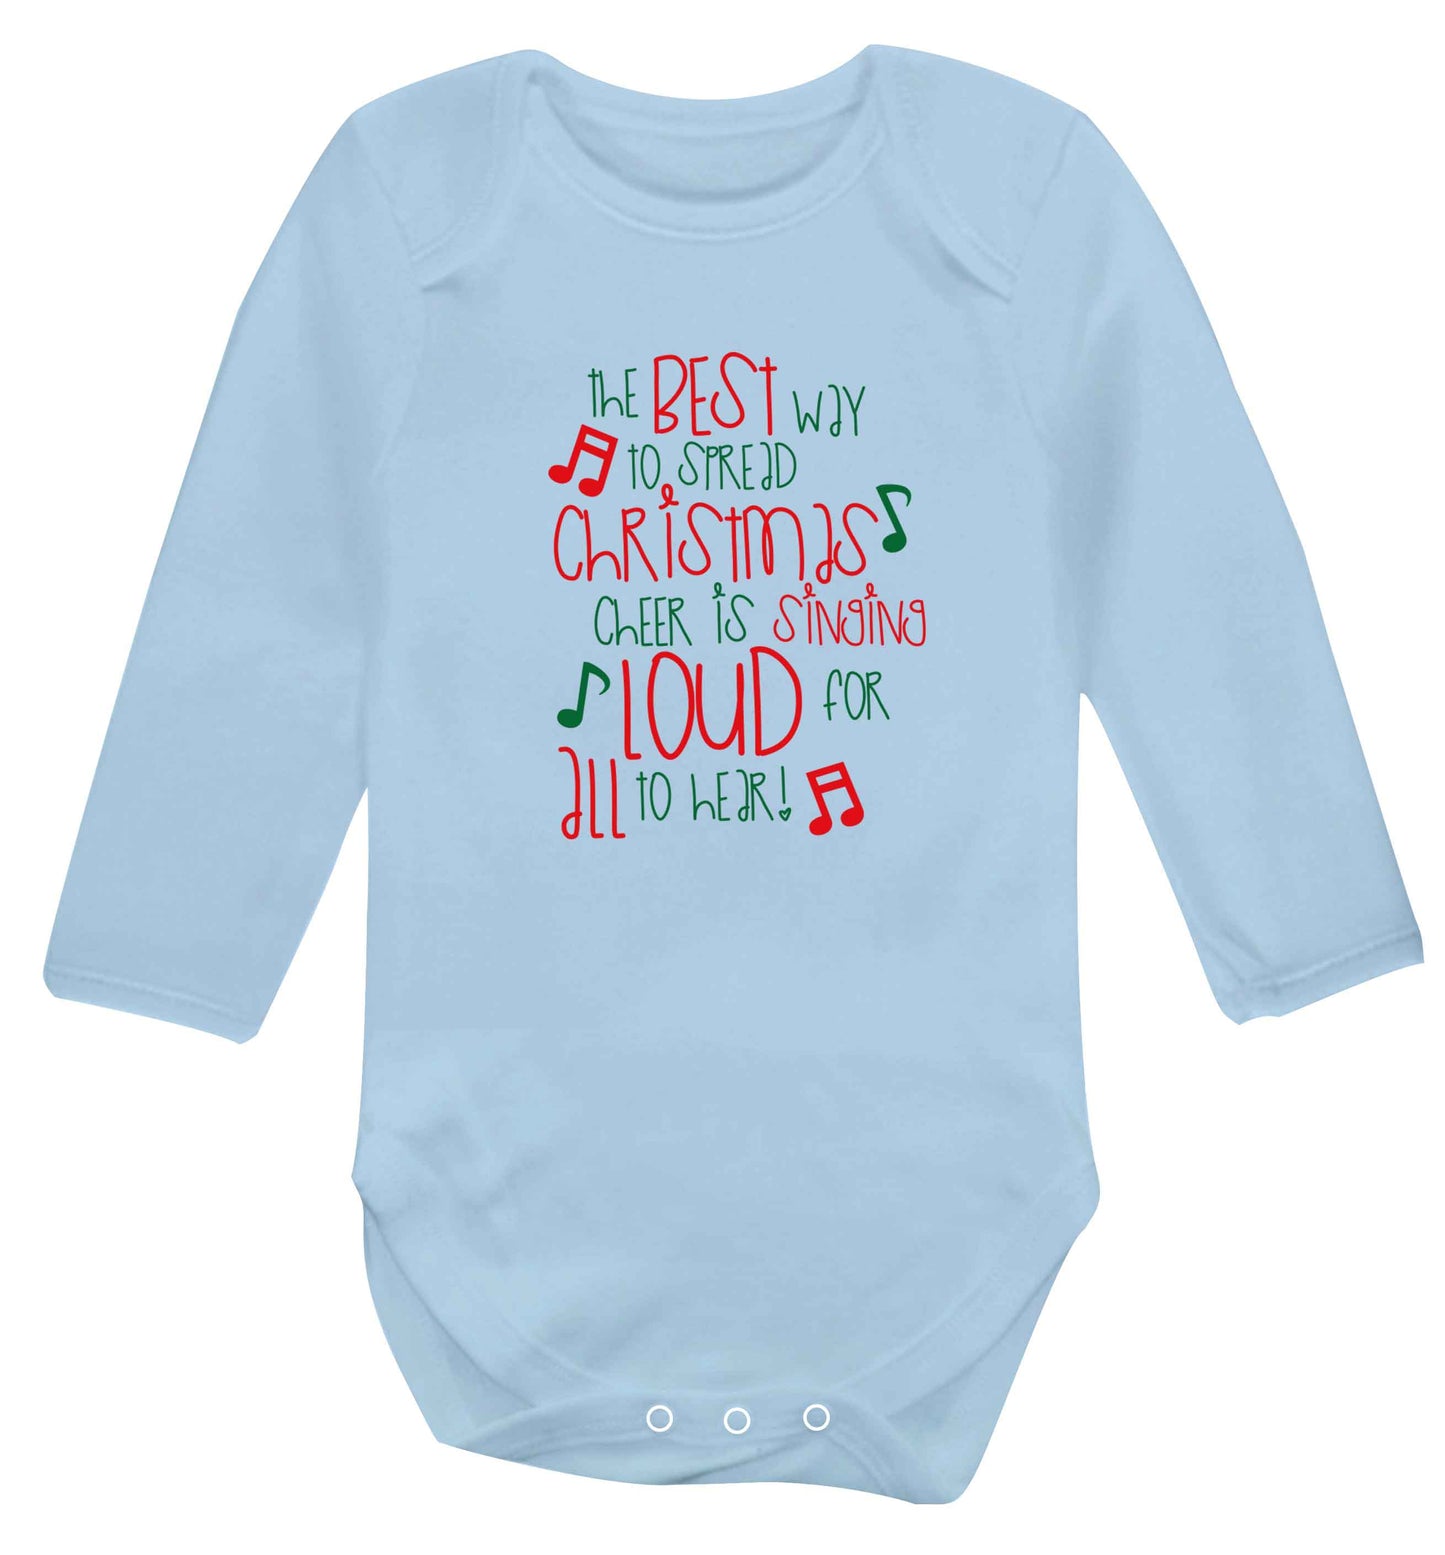 The best way to spread Christmas cheer is singing loud for all to hear baby vest long sleeved pale blue 6-12 months